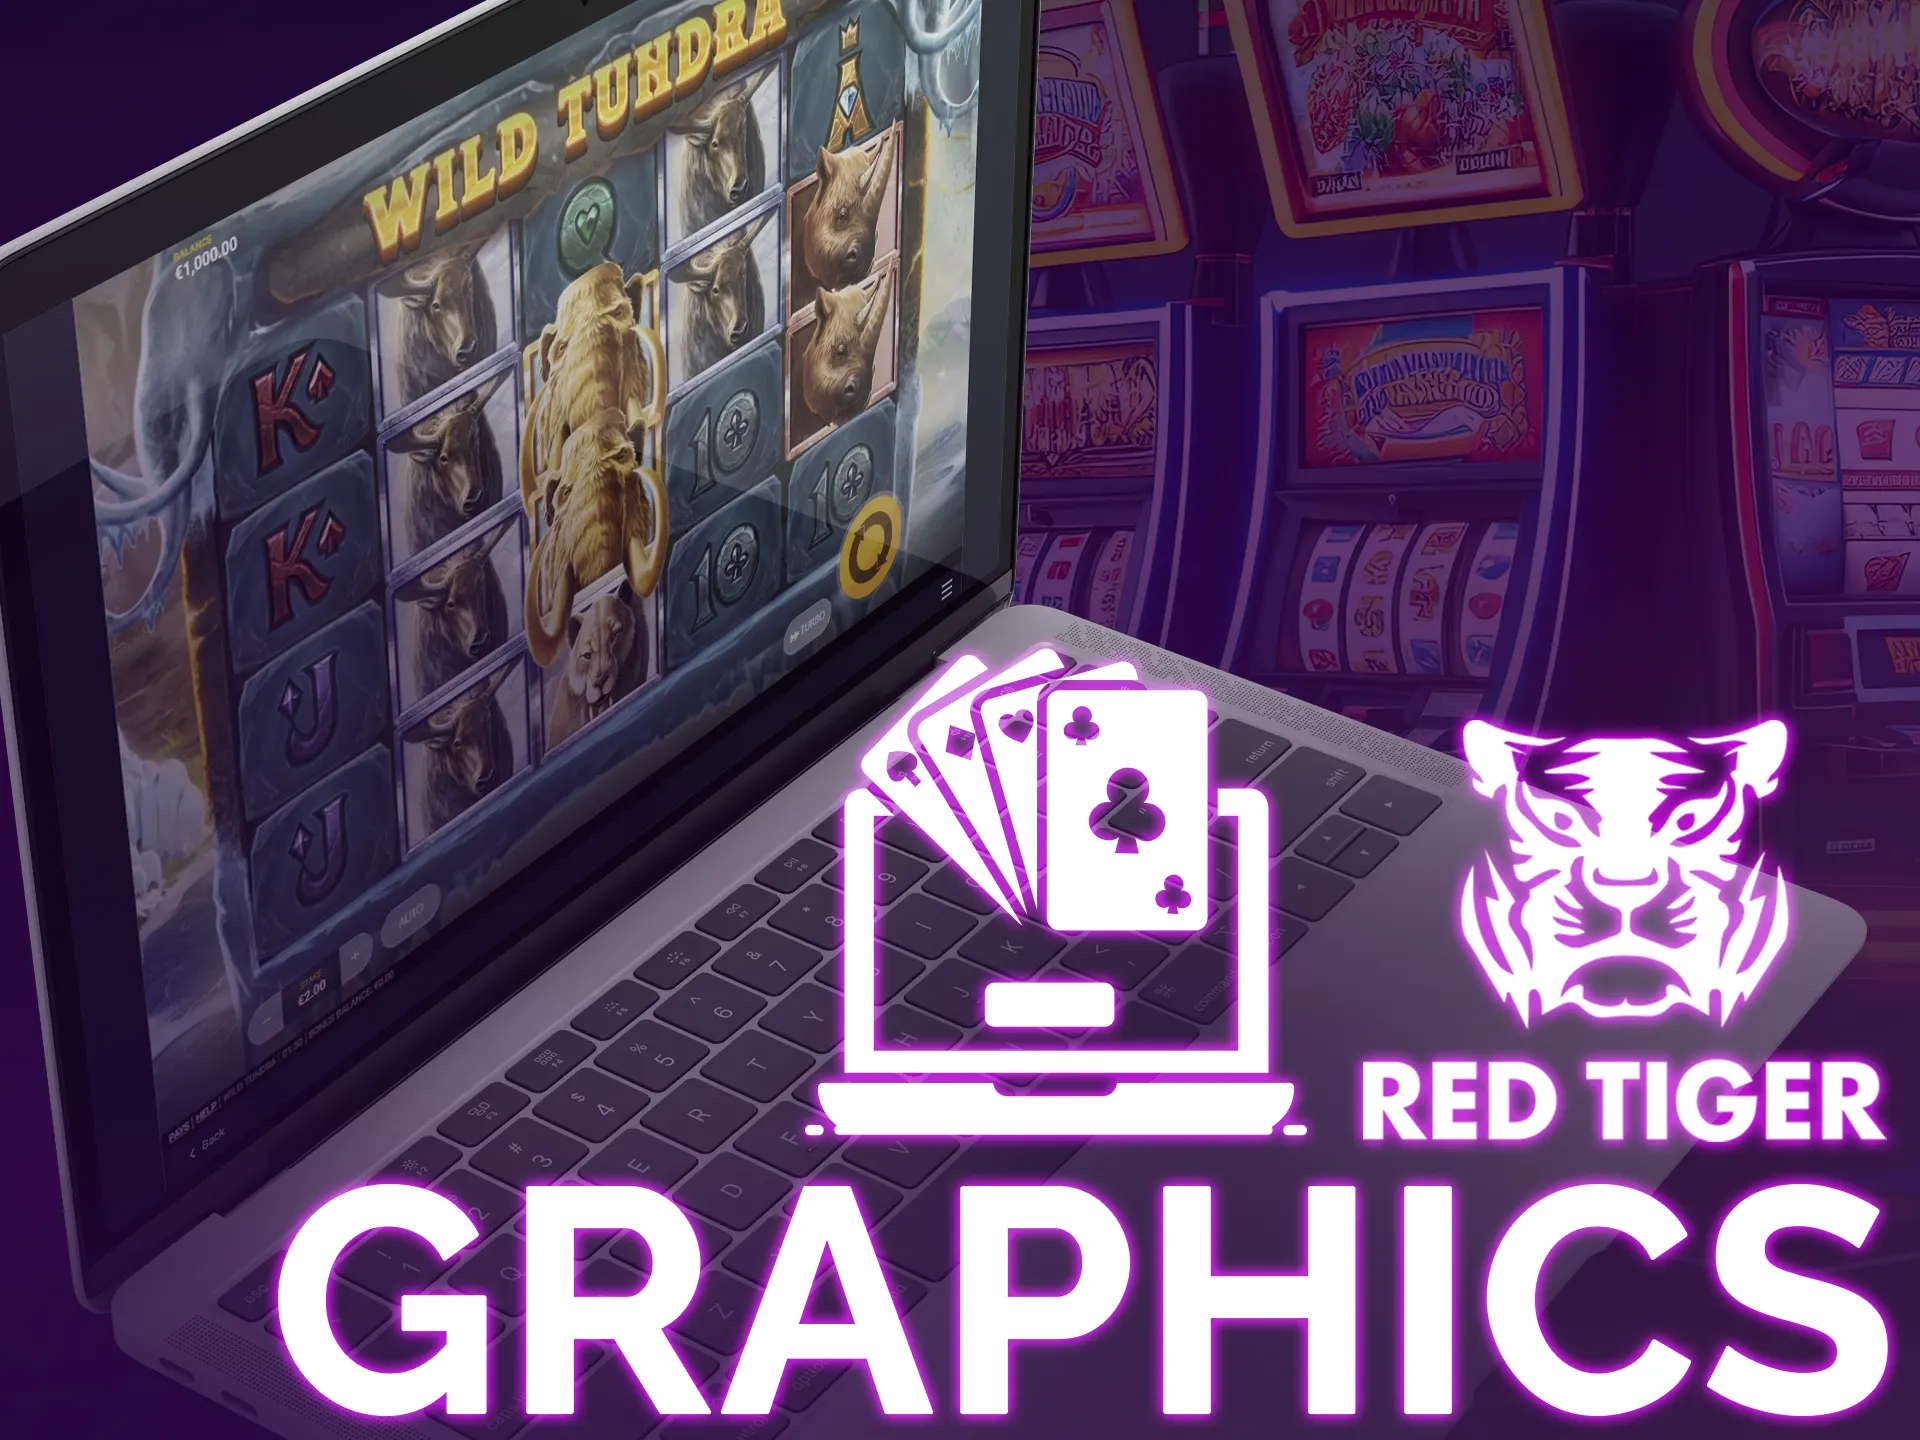 Red Tiger excels in graphics, utilizing modern technologies for vibrant characters and symbolism, ensuring visual delight.